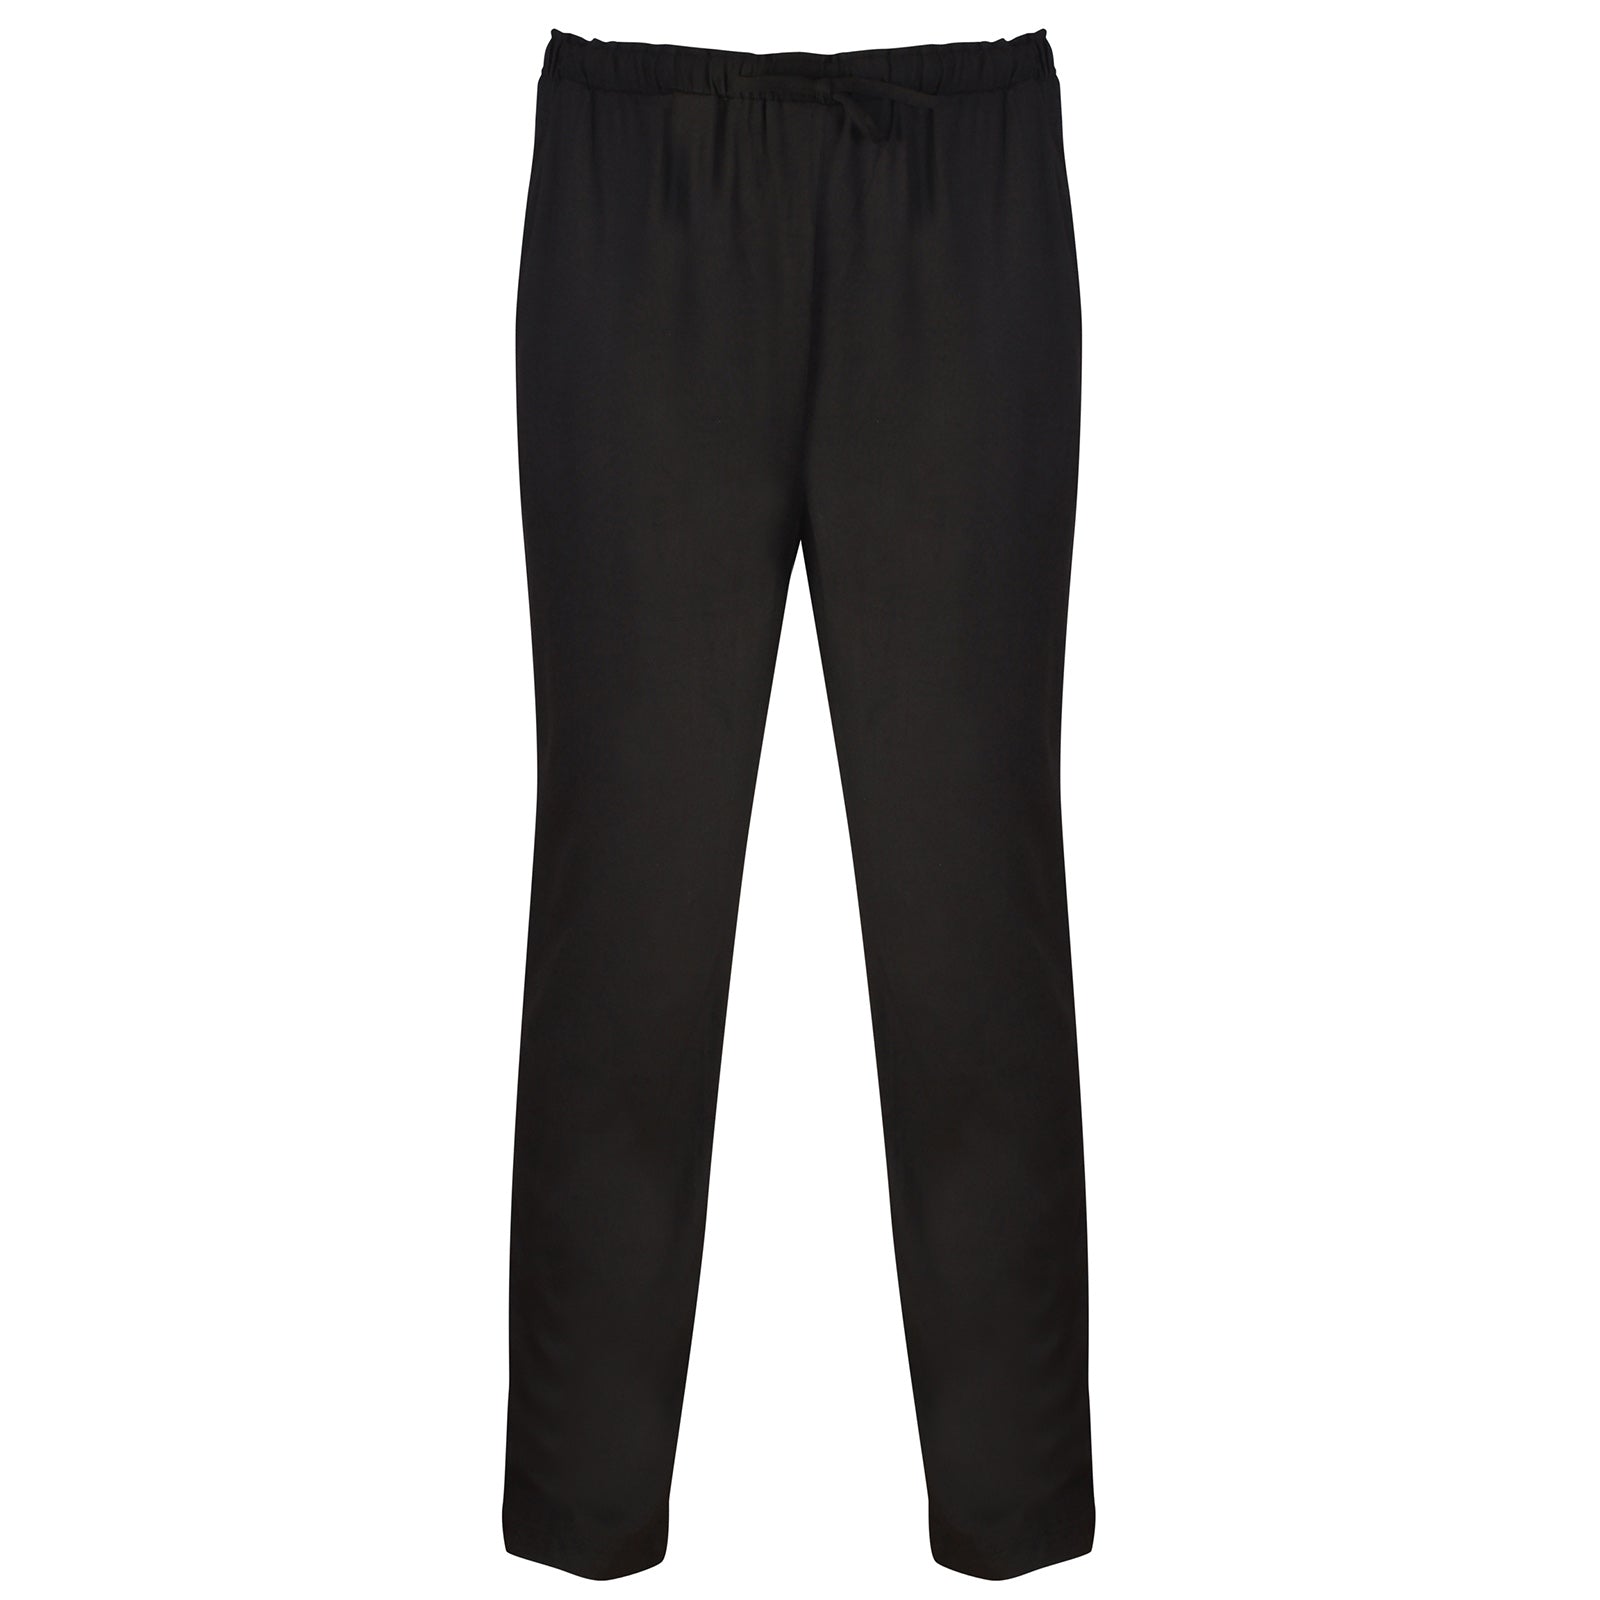 Bamboo Lounge Trousers Black - Natural Clothes Bamboo Clothing & Accessories for Men & Women 